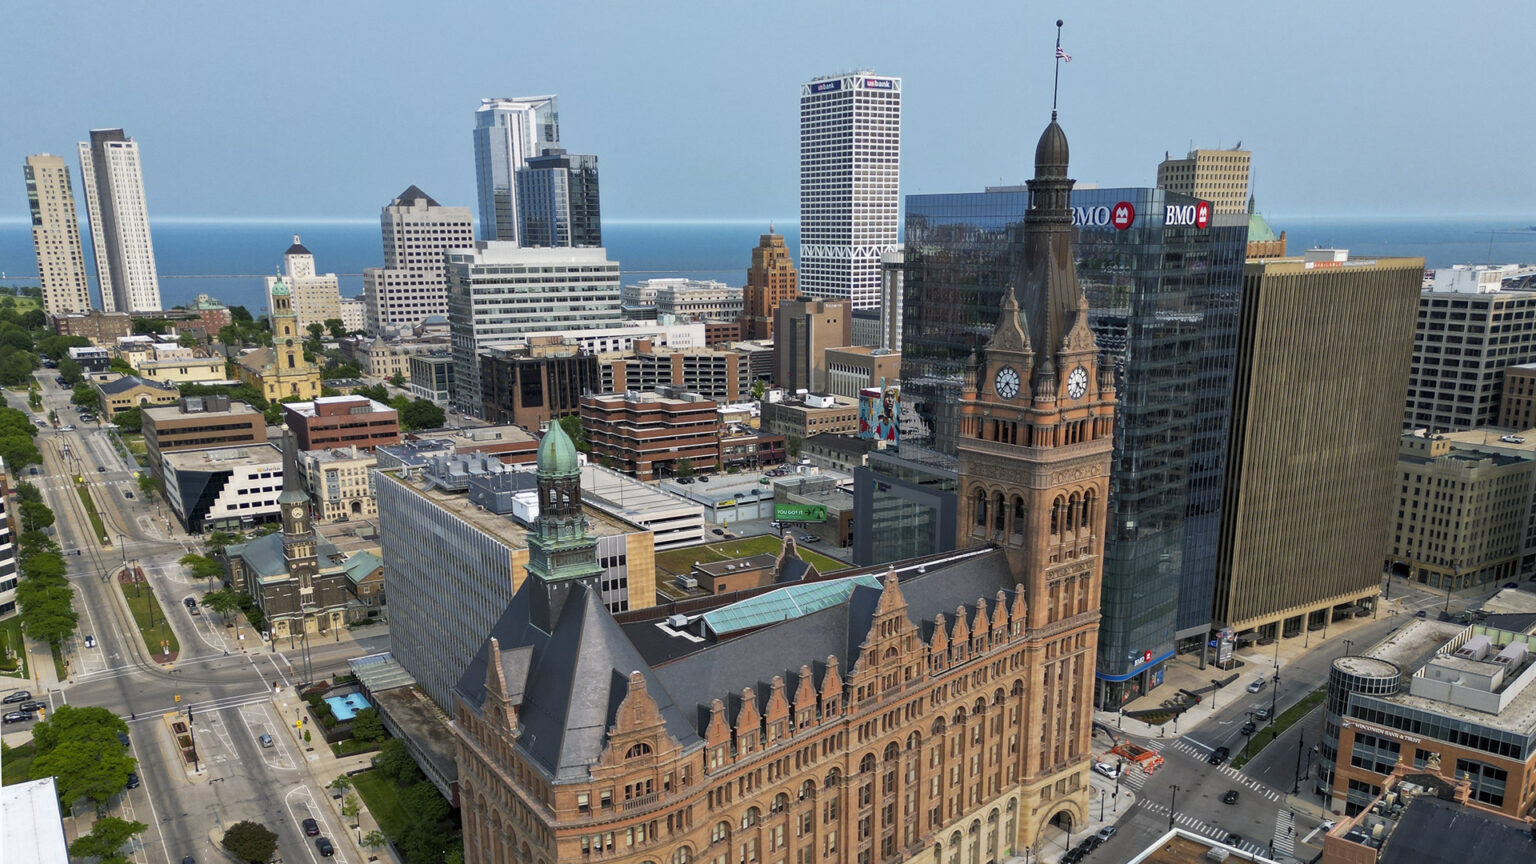 An aerial photo shows a brick and masonry Renaissance Revival style building with multiple spires and a clock tower stands in the foreground of a downtown skyline of buildings of varying heights, with the waters of Lake Michigan visible in the background.